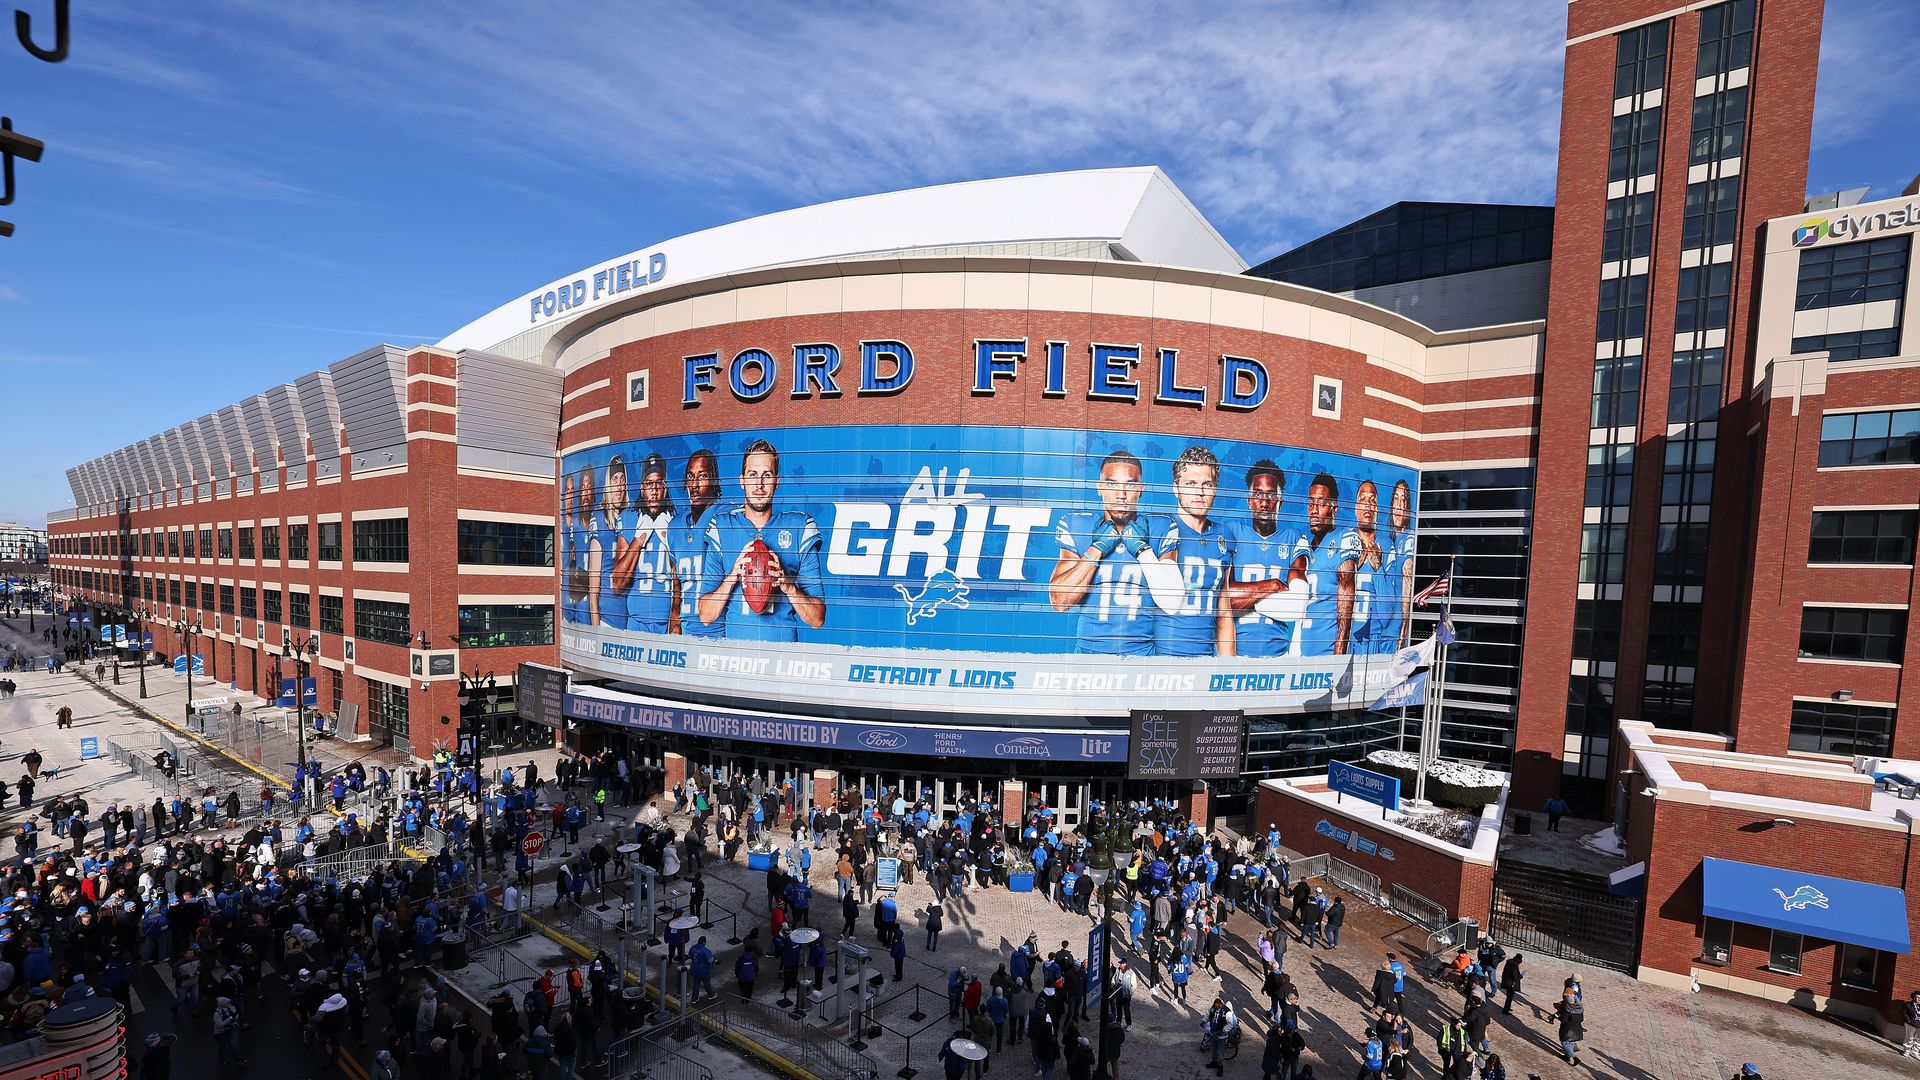 Fans gather at Ford Field for last Sunday's playoff game against the Tampa Bay Buccaneers. Photo: Gregory Shamus/Getty Images